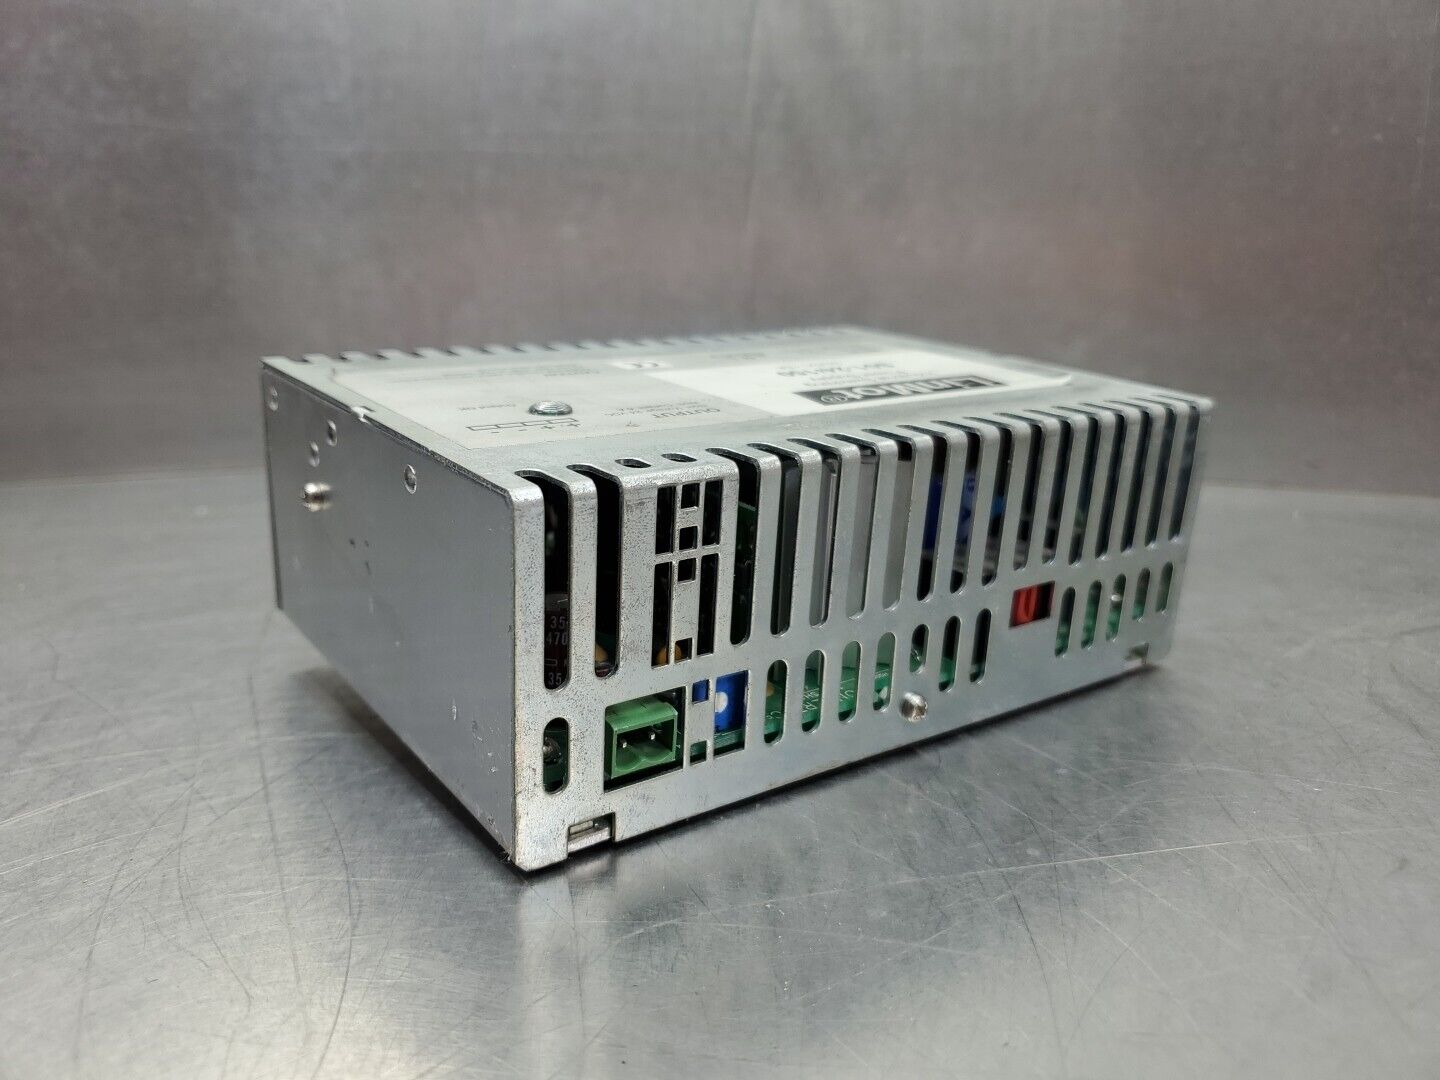 LinMot S01-24/150 INDUSTRIAL SWITCHING POWER SUPPLY, 24VDC 6A.             4D-25